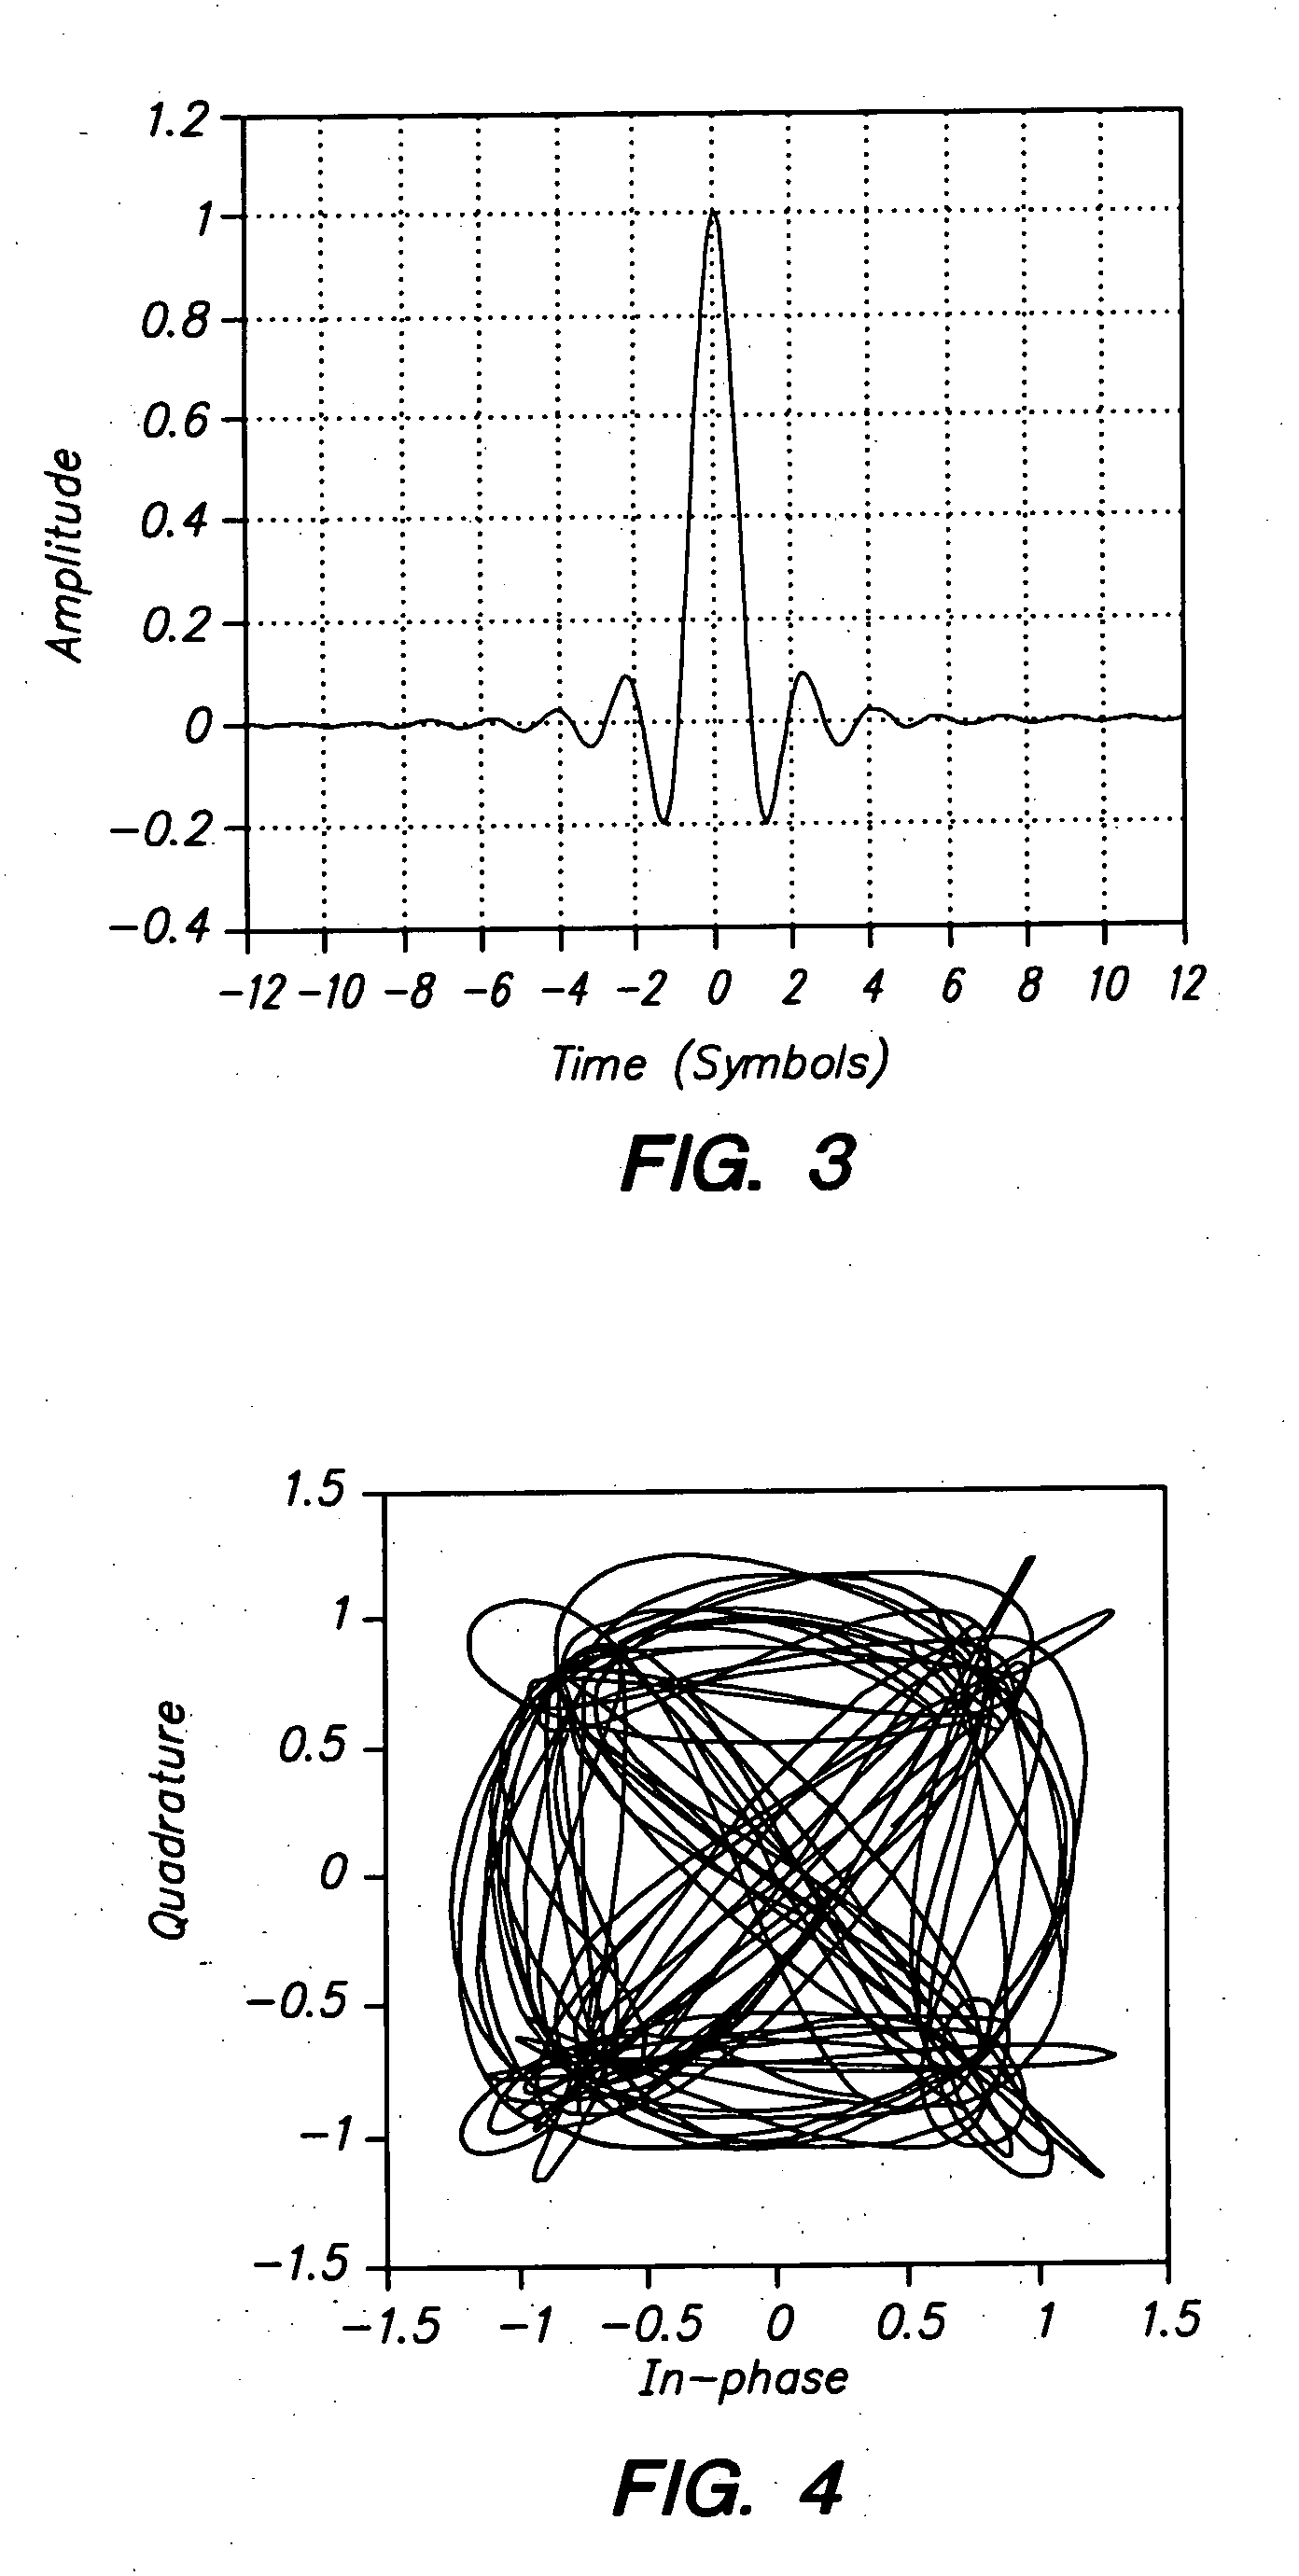 Reduction of average-to-minimum power ratio in communications signals